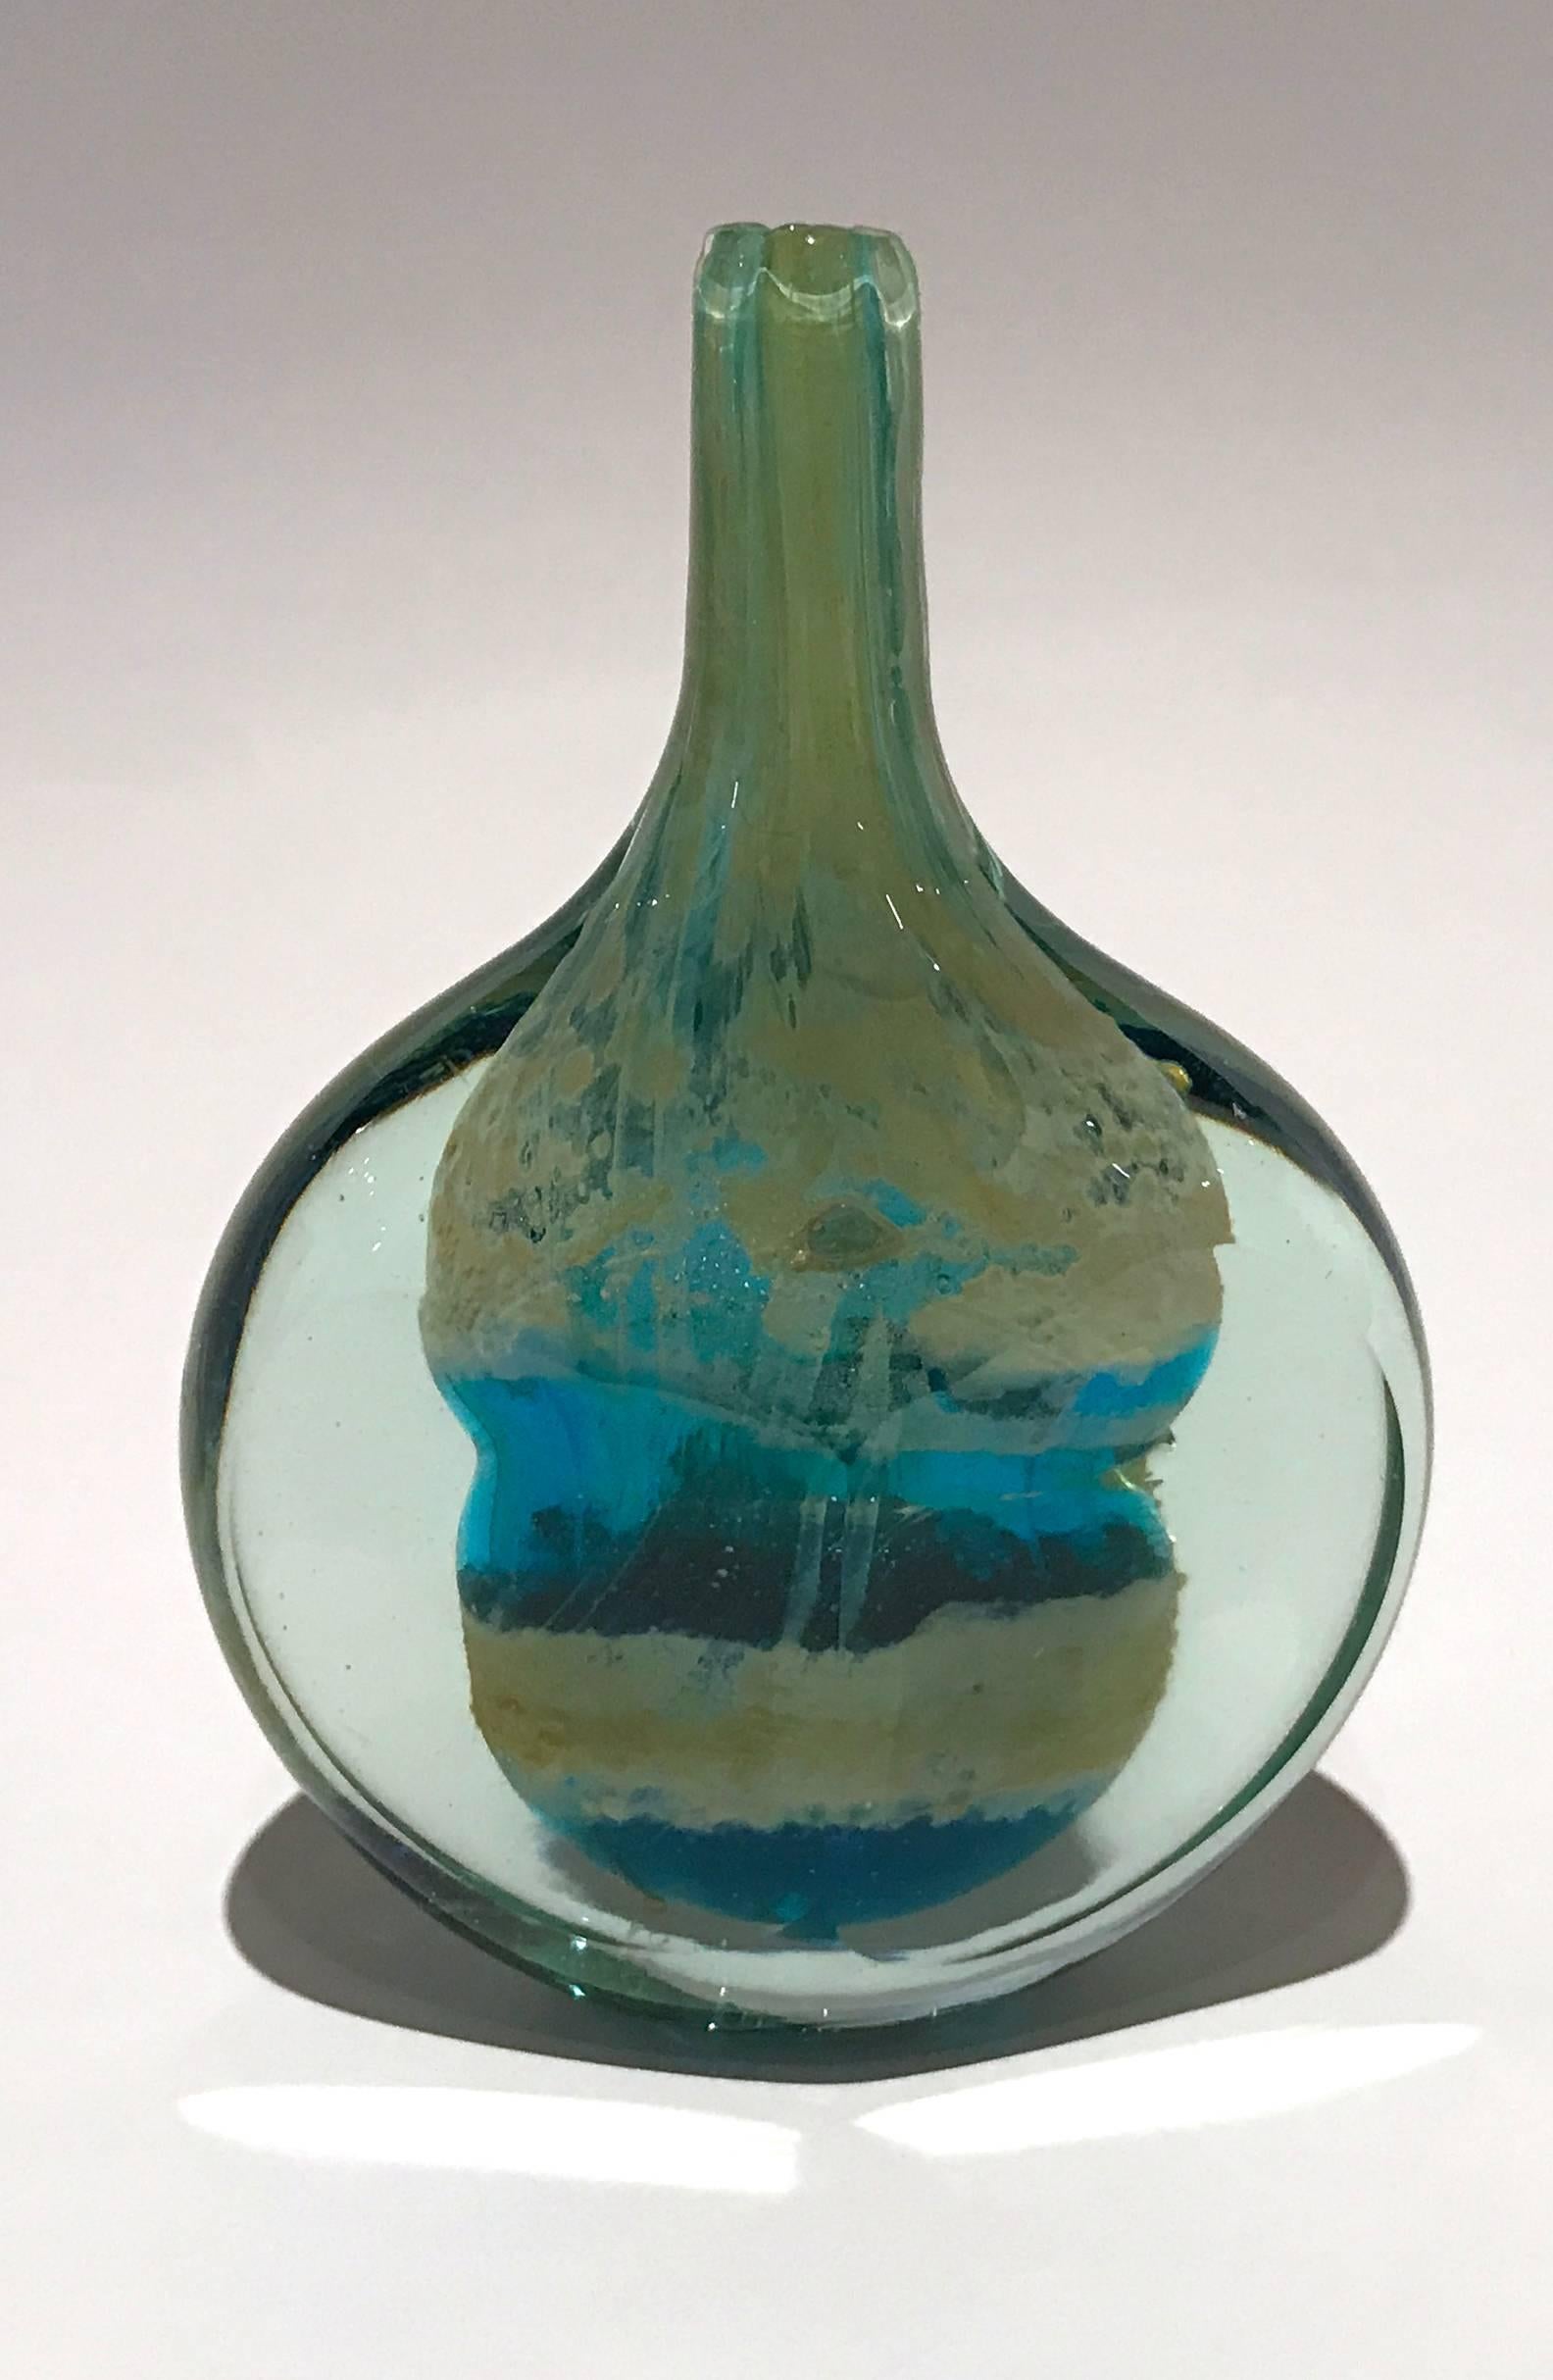 Early handcrafted glass 'Cut Ice' fish vase by Michael Harris for Mdina glass on the Mediterranean island of Malta. Signed Mdina on the base.

Michael Harris 1933-1994. Michael Harris, a lecturer in industrial glass design at the Royal College of